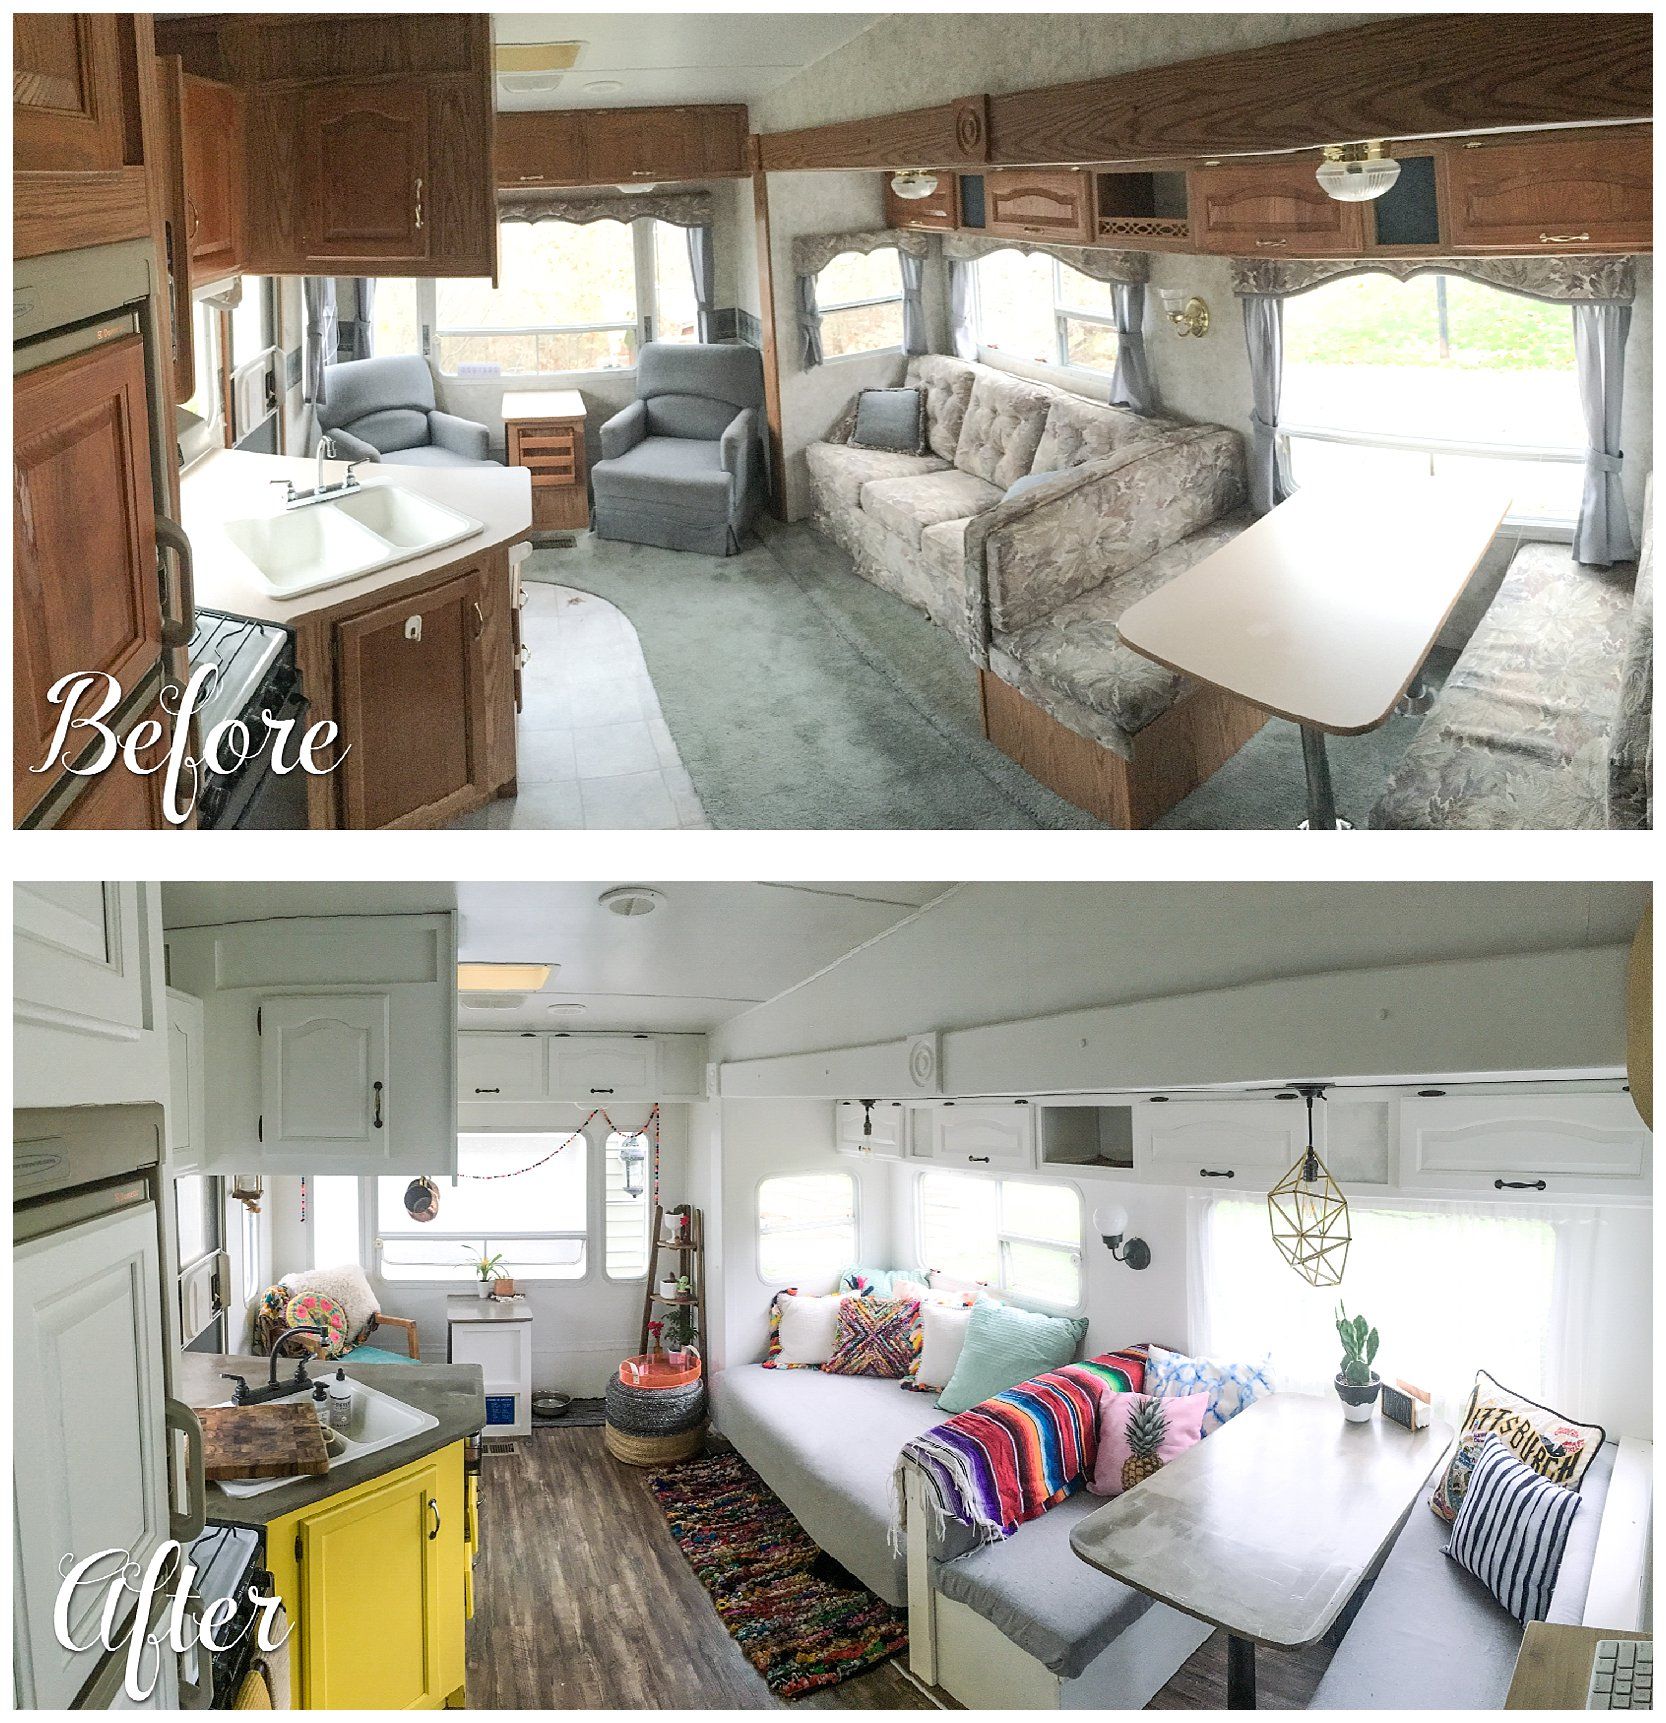 Before and after photos of a camper renovation living space ...